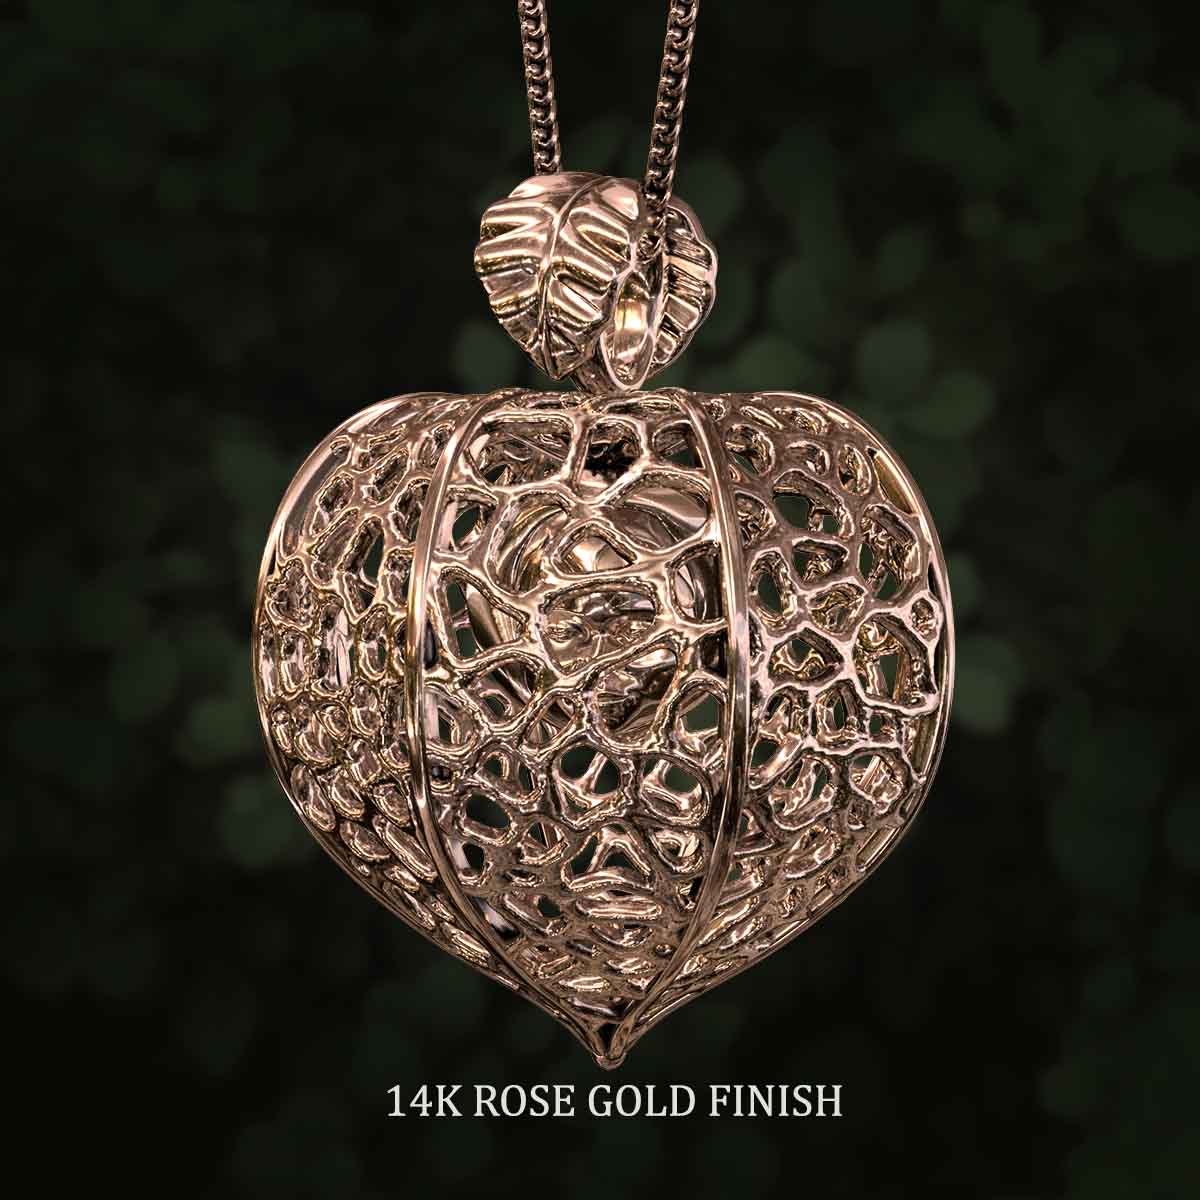 14k-Rose-Gold-Finish-Chinese-Lantern-Plant-With-a-Cute-Face-Inside-the-Seed-Pendant-Jewelry-For-Necklace